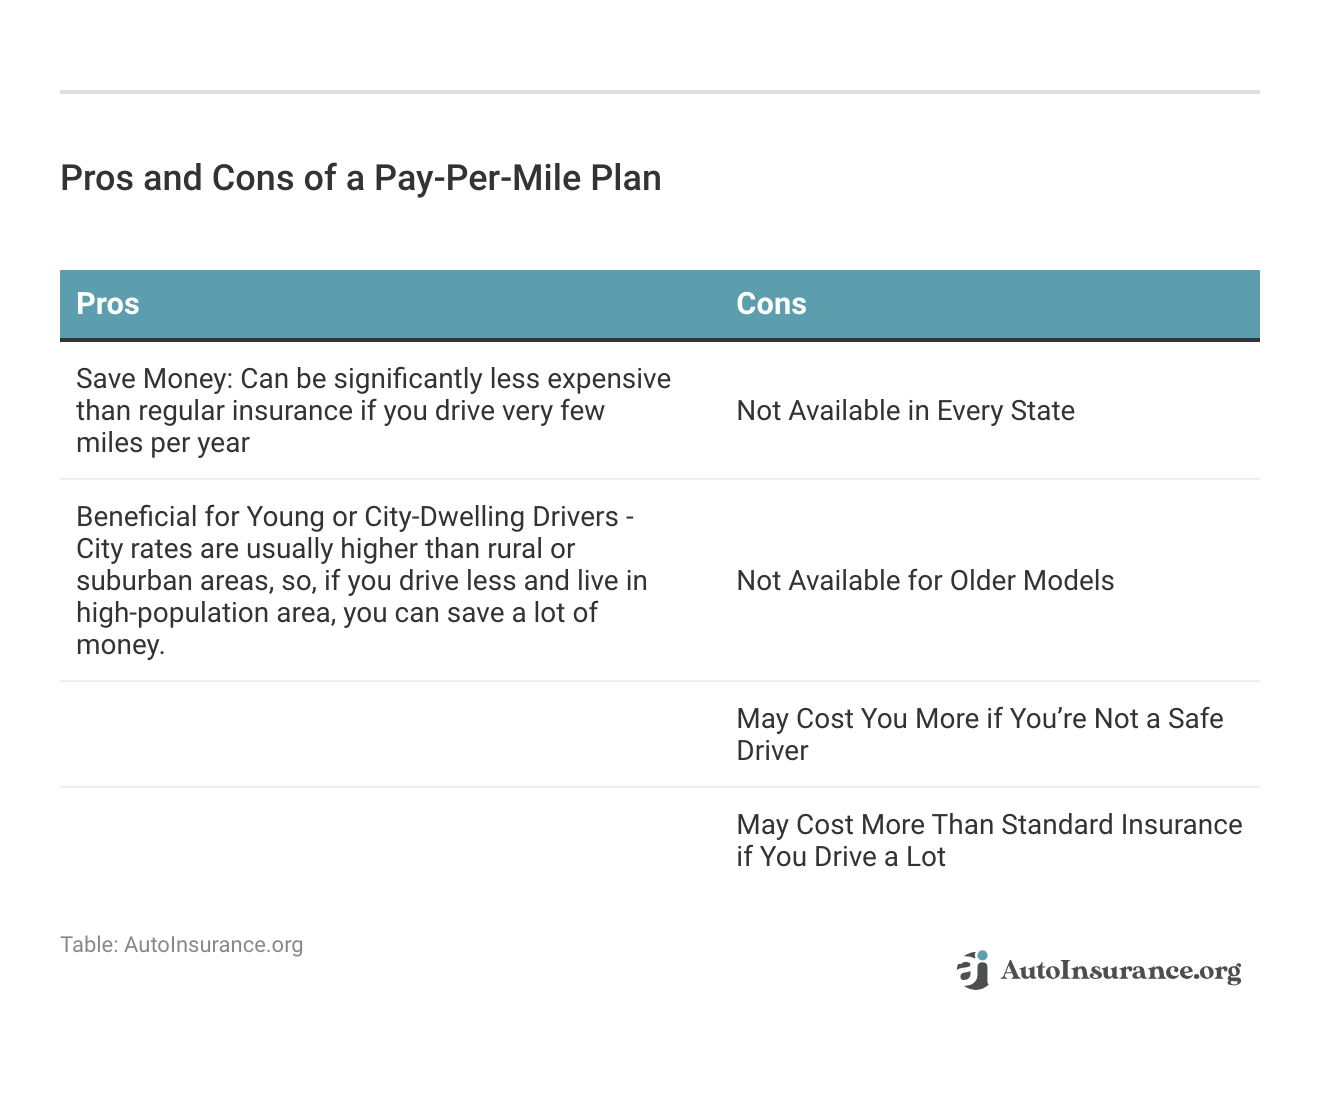 <h3>Pros and Cons of a Pay-Per-Mile Plan</h3>